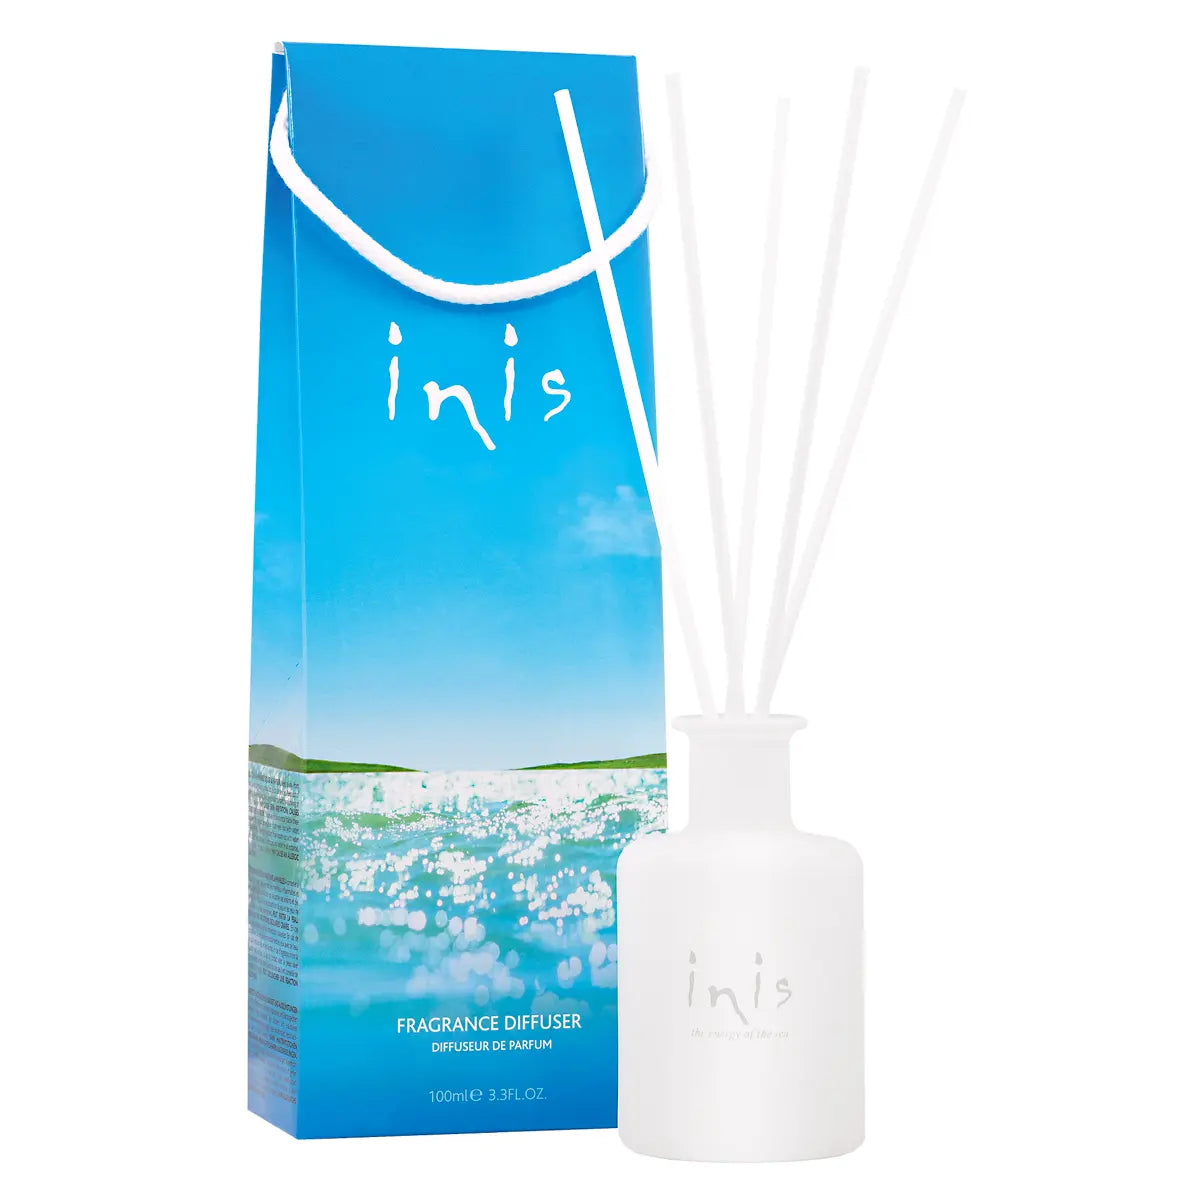 Inis the Energy of the Sea: Fragrance Diffuser